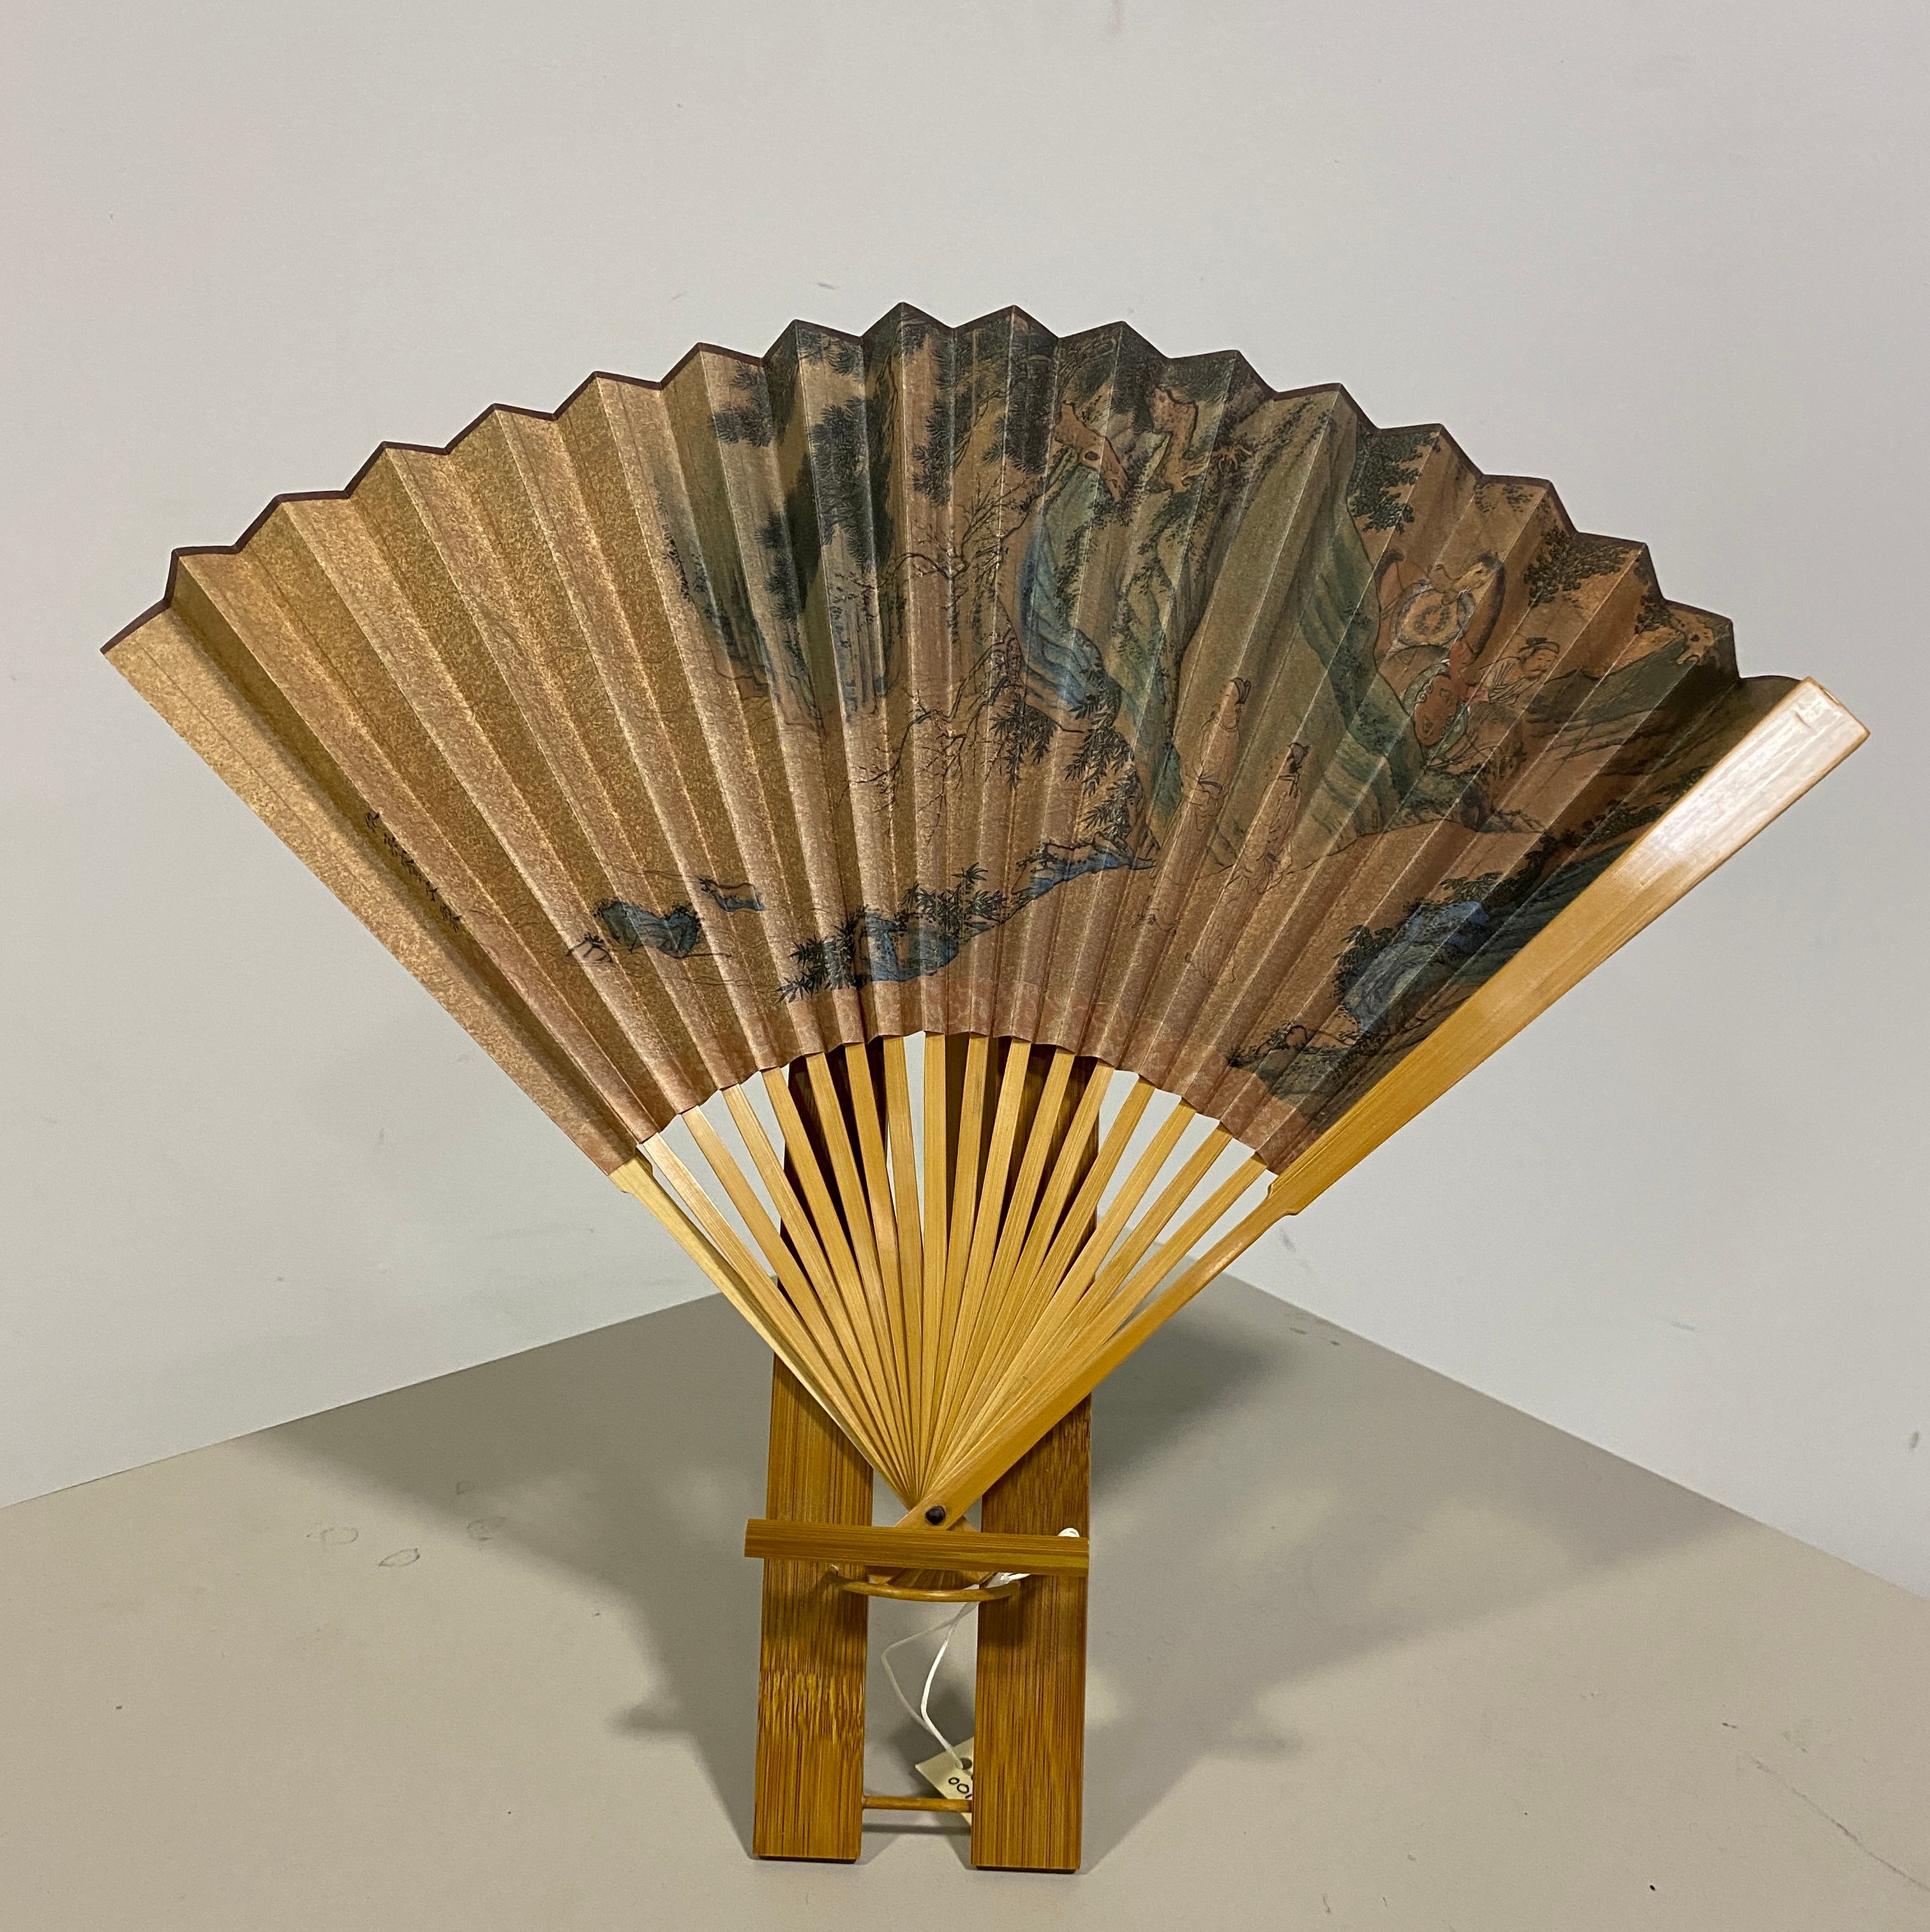 a wooden Japanese fan with mountains, trees, and rivers painted on it